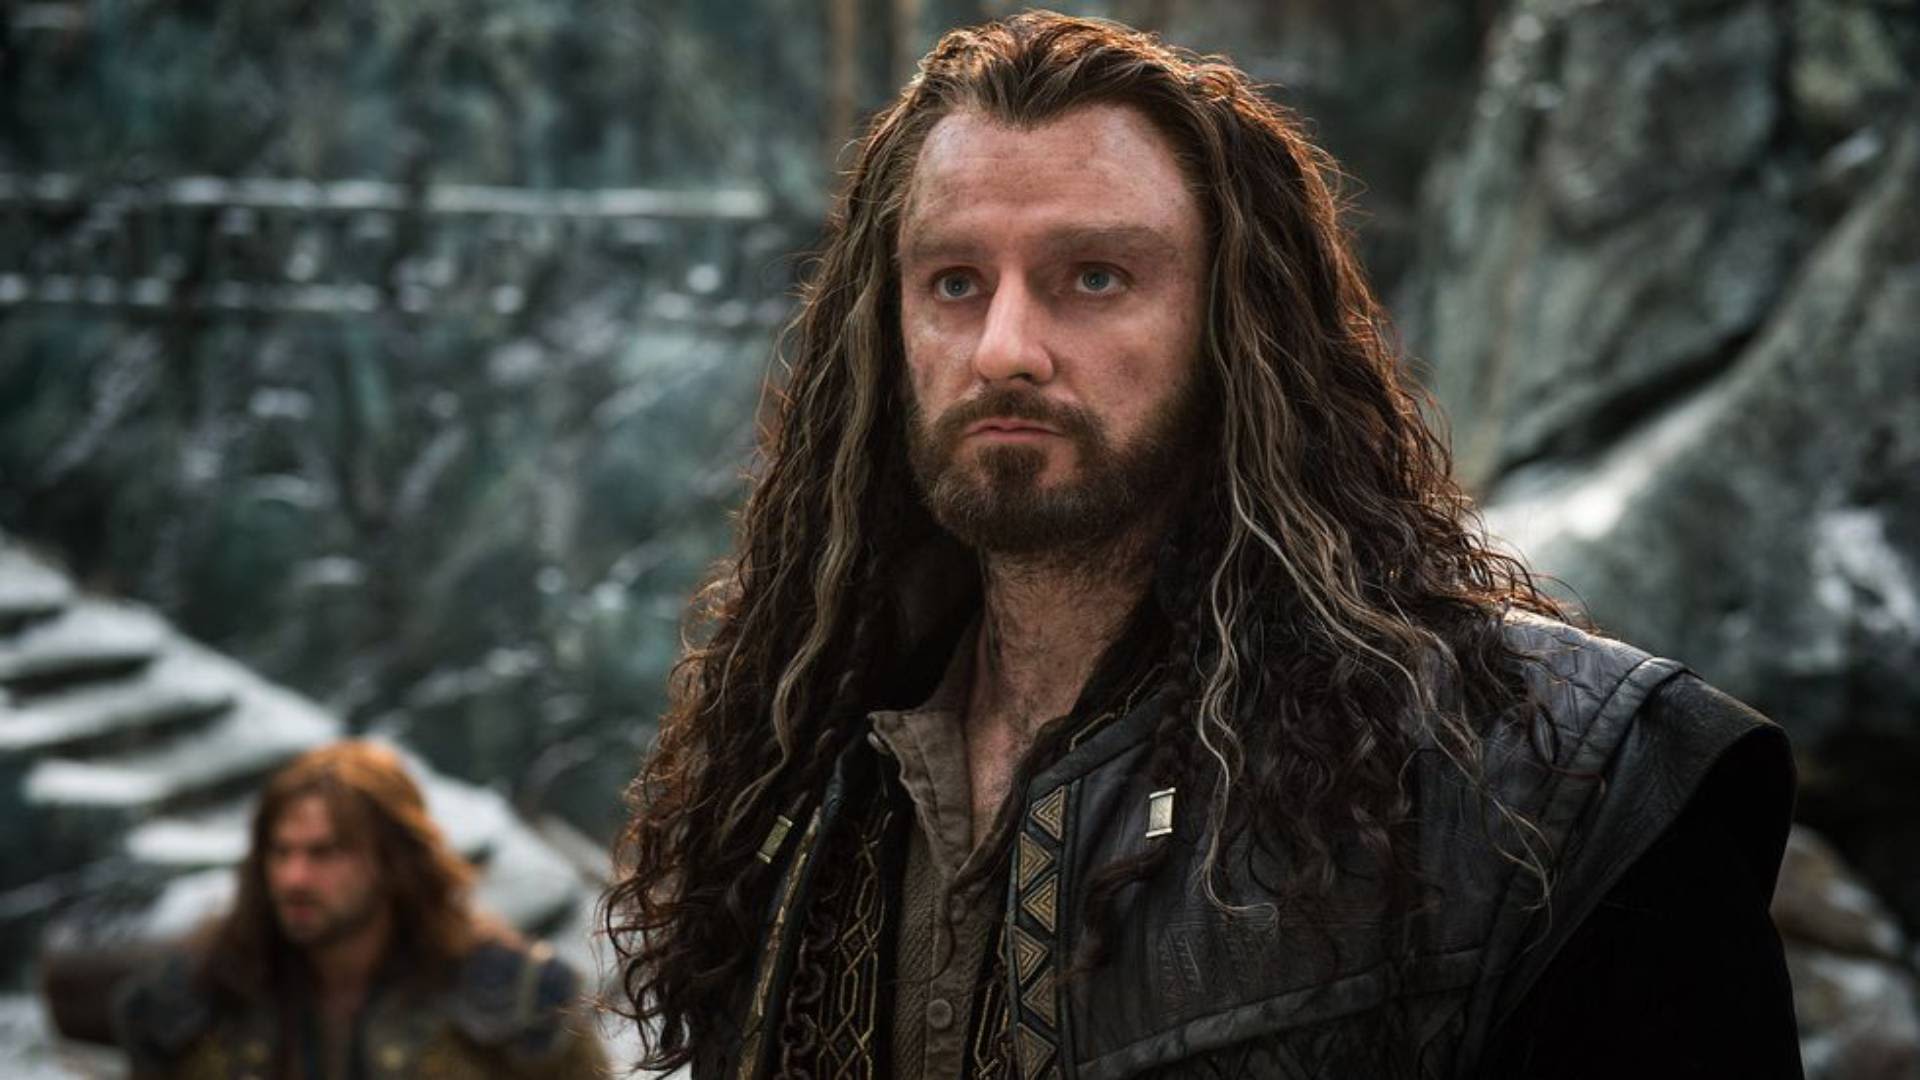 The Hobbit star "genuinely thought he was going to be fired" before filming started so he didn’t even unpack